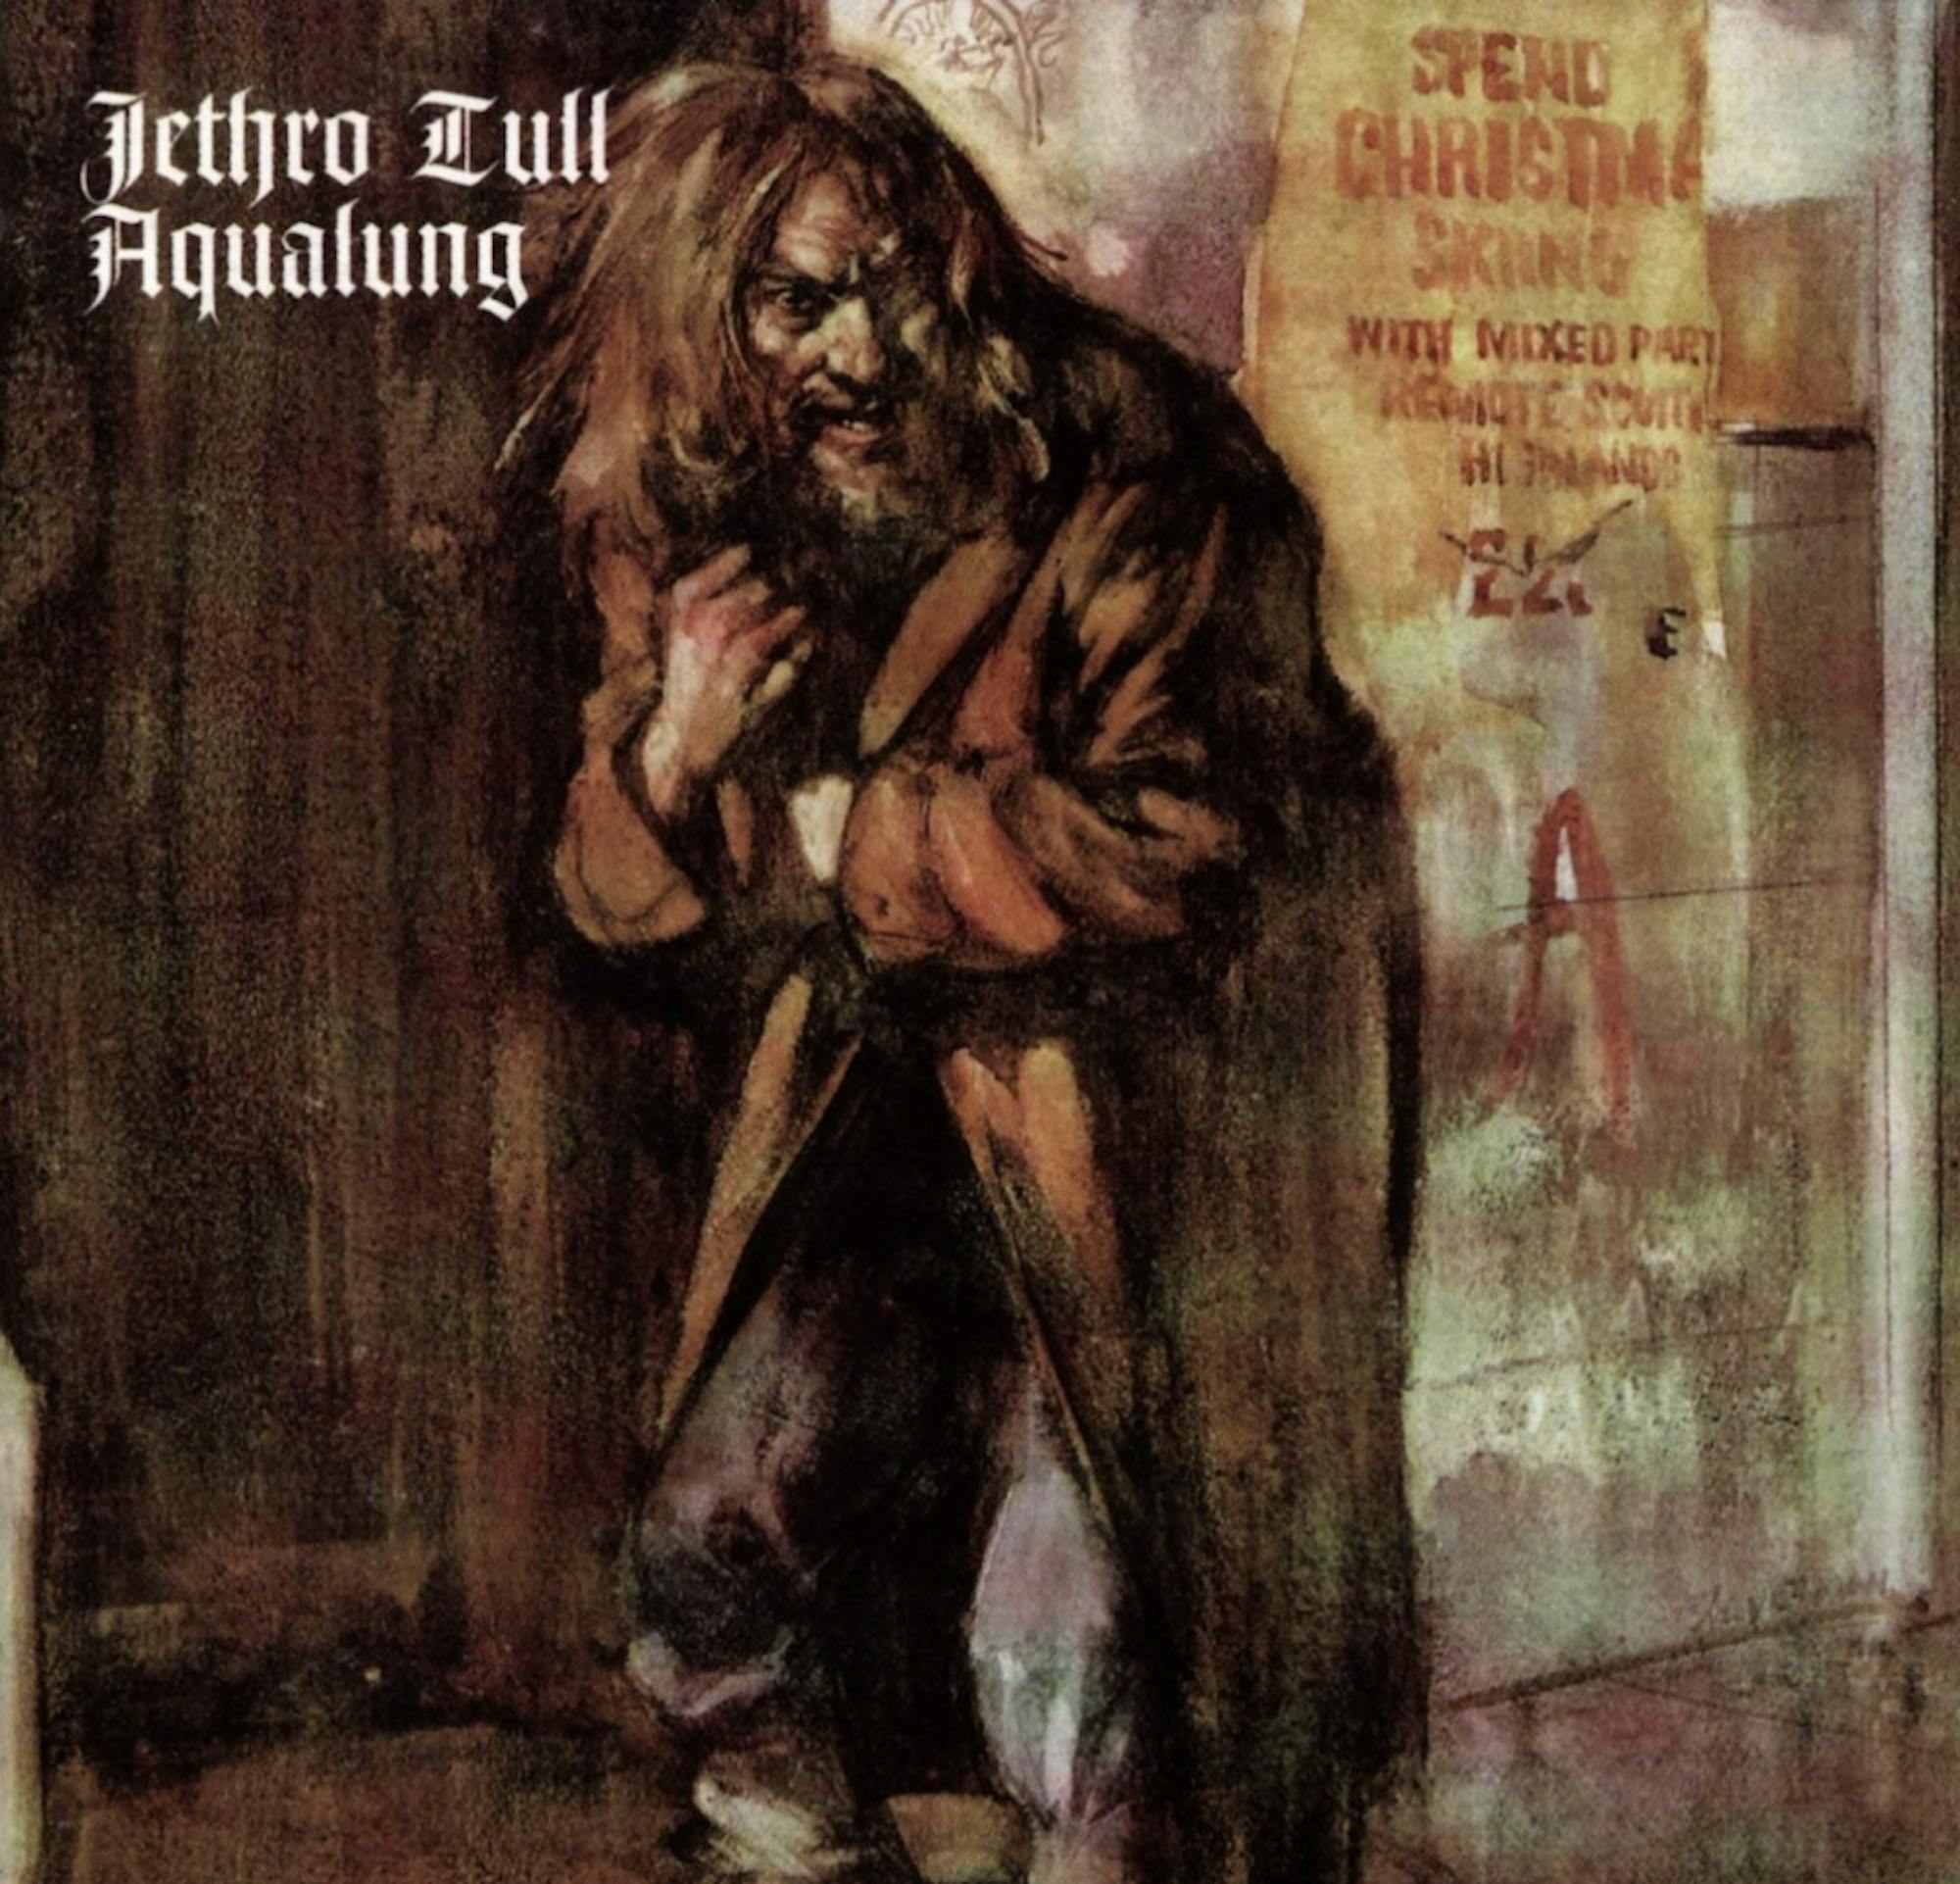 Revisiting the impact of Jethro Tull's 'Aqualung' 50 years later